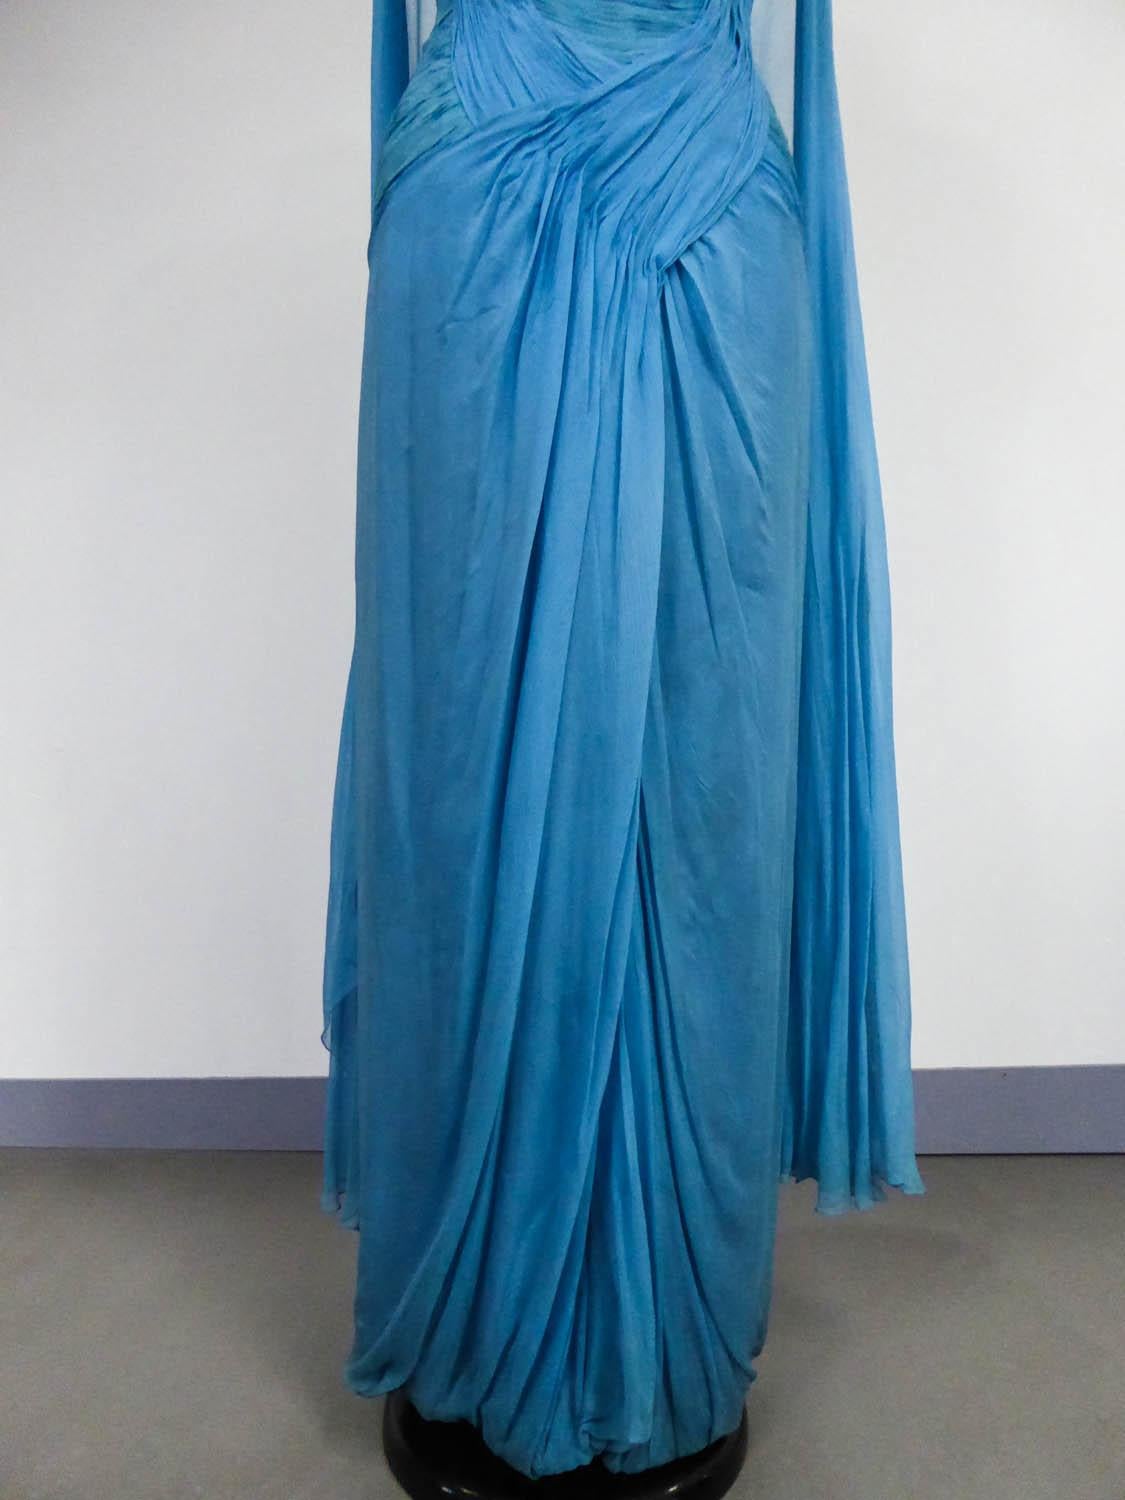 Blue A French Carven Couture Chiffon Evening Dress numbered 11150 Circa 1960/1970 For Sale